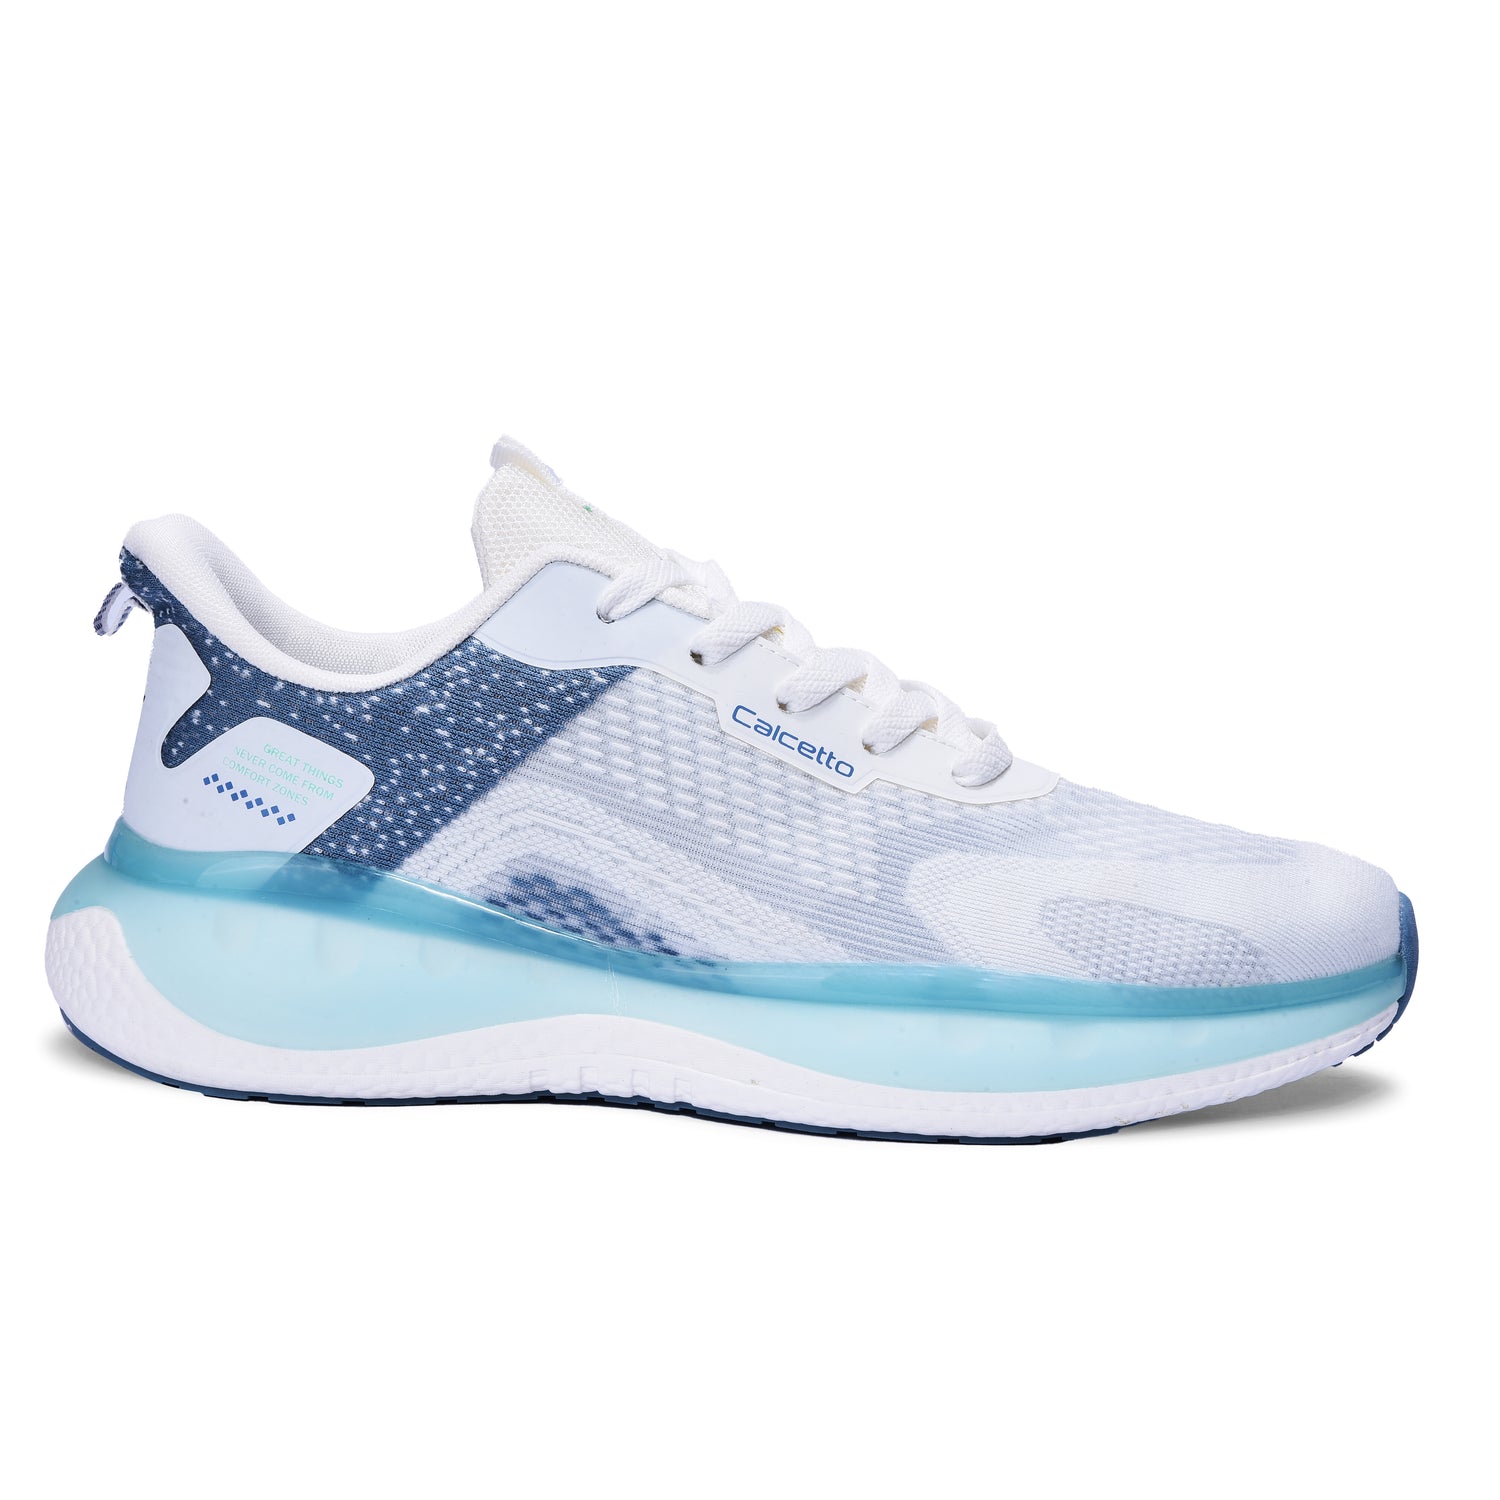 Calcetto CLT-0986 White Blue Running Shoe For Men